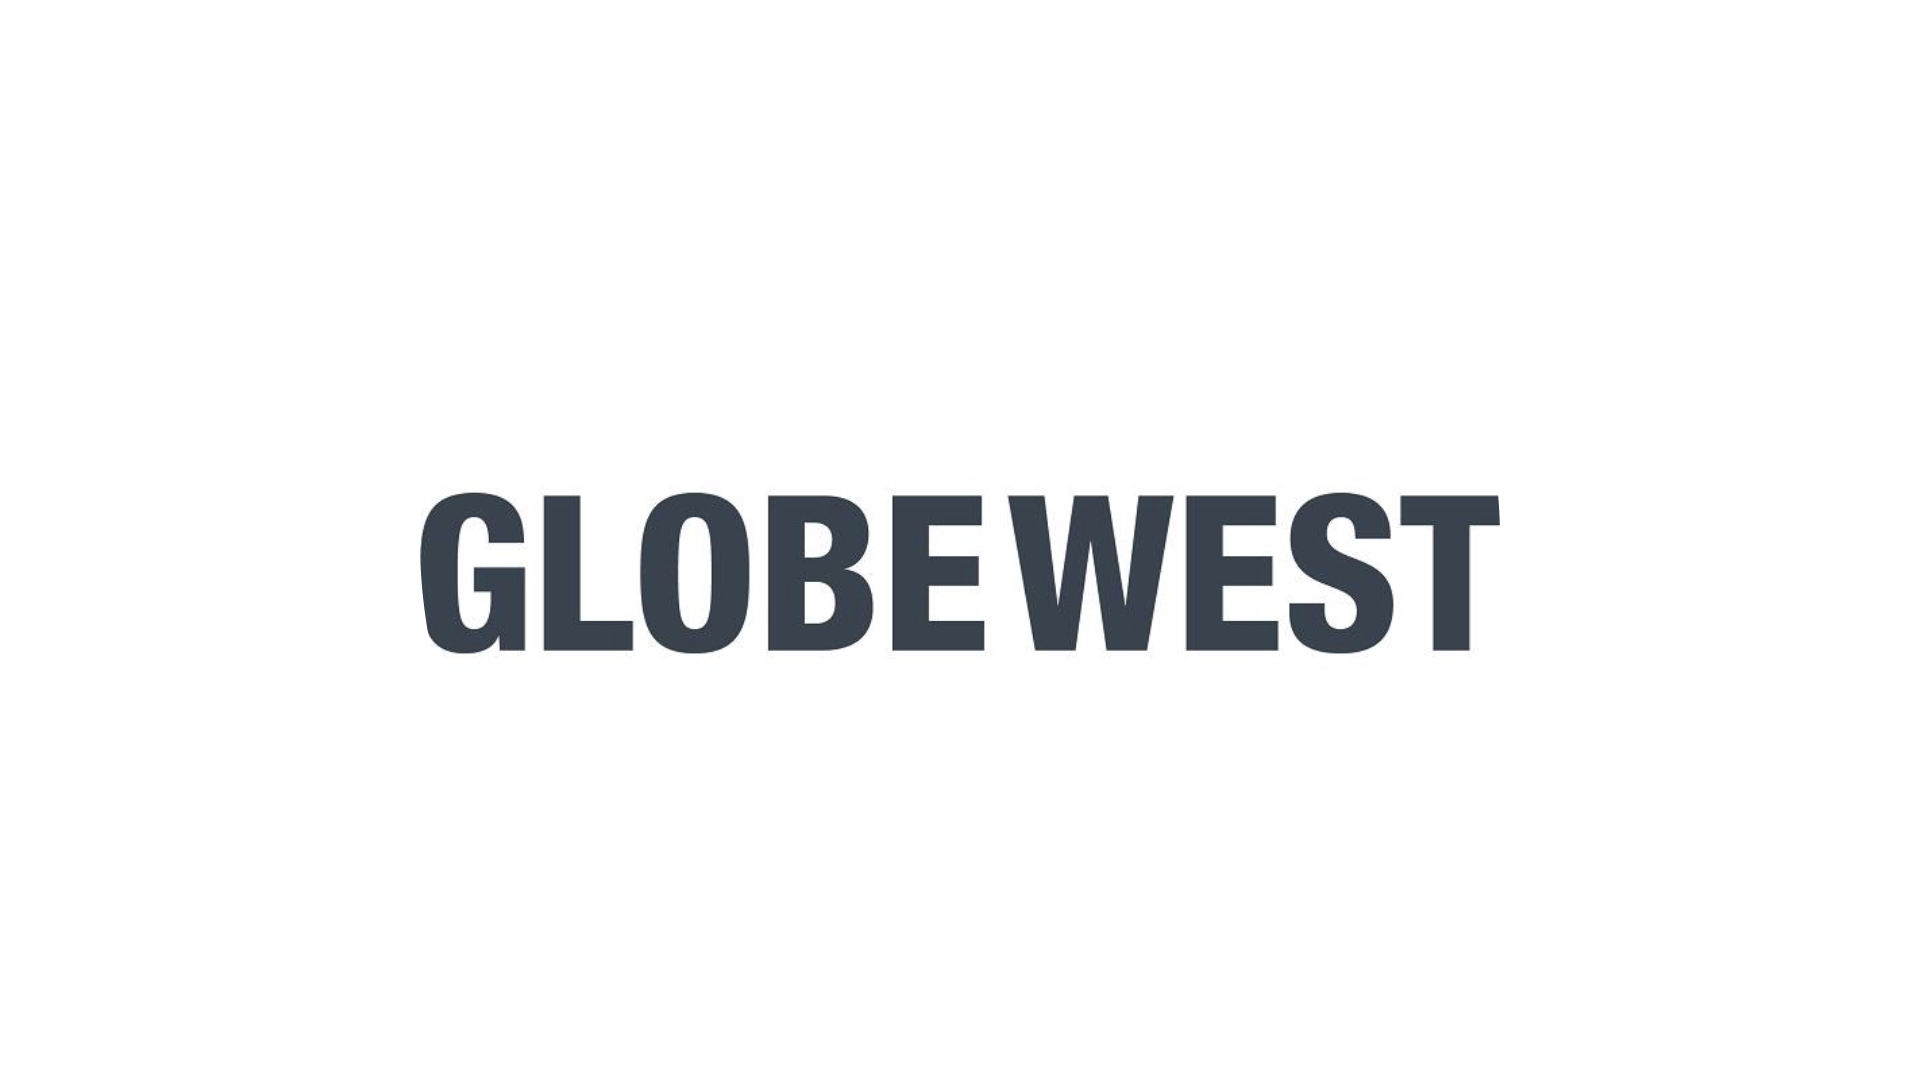 Get the Nordic style by shopping with Globewest